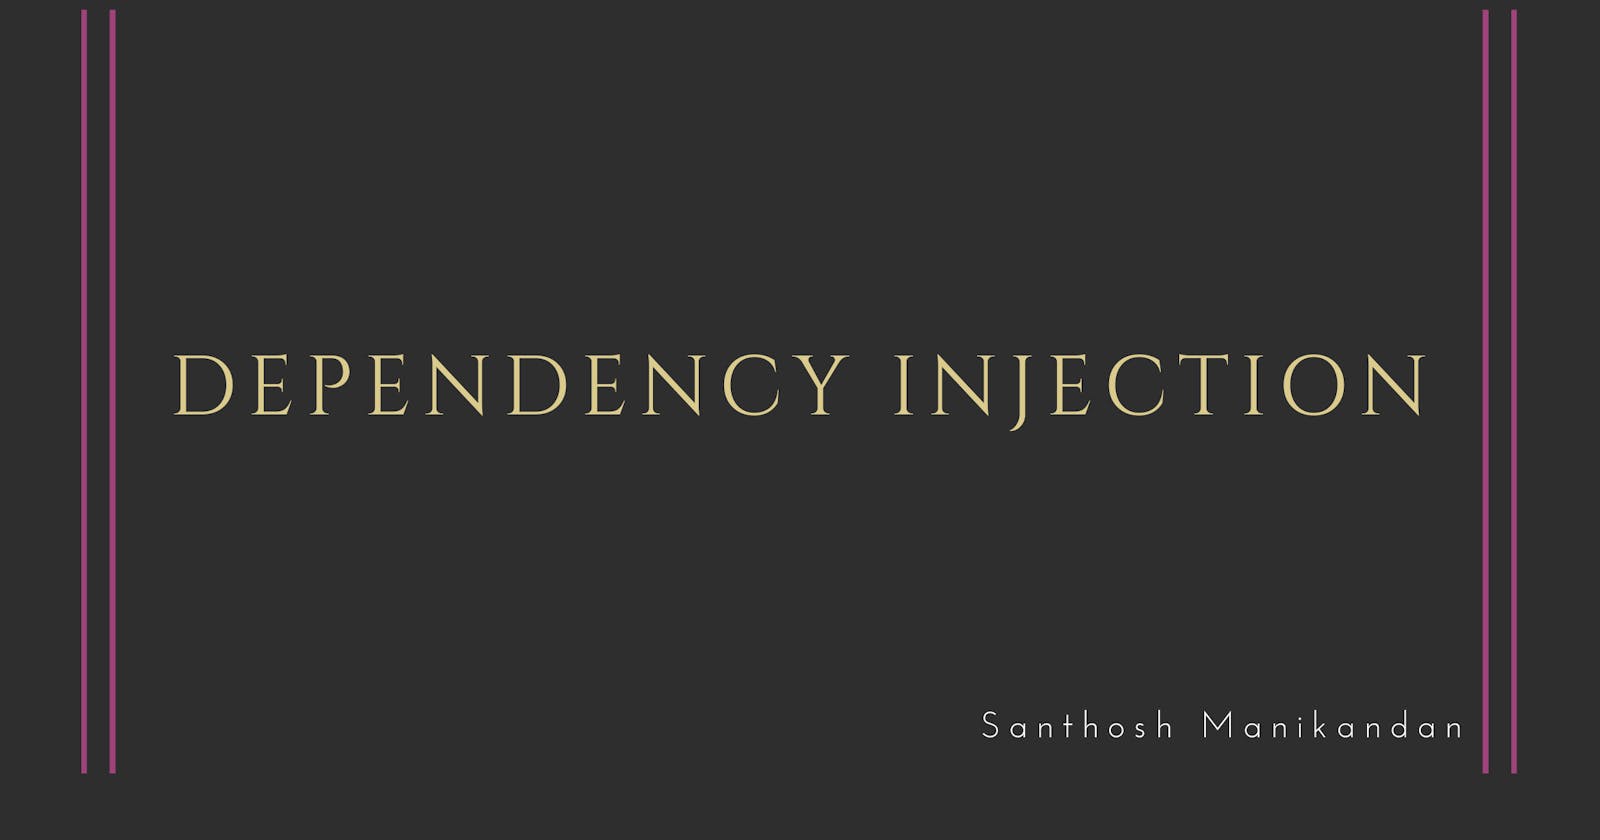 So what's dependency injection?